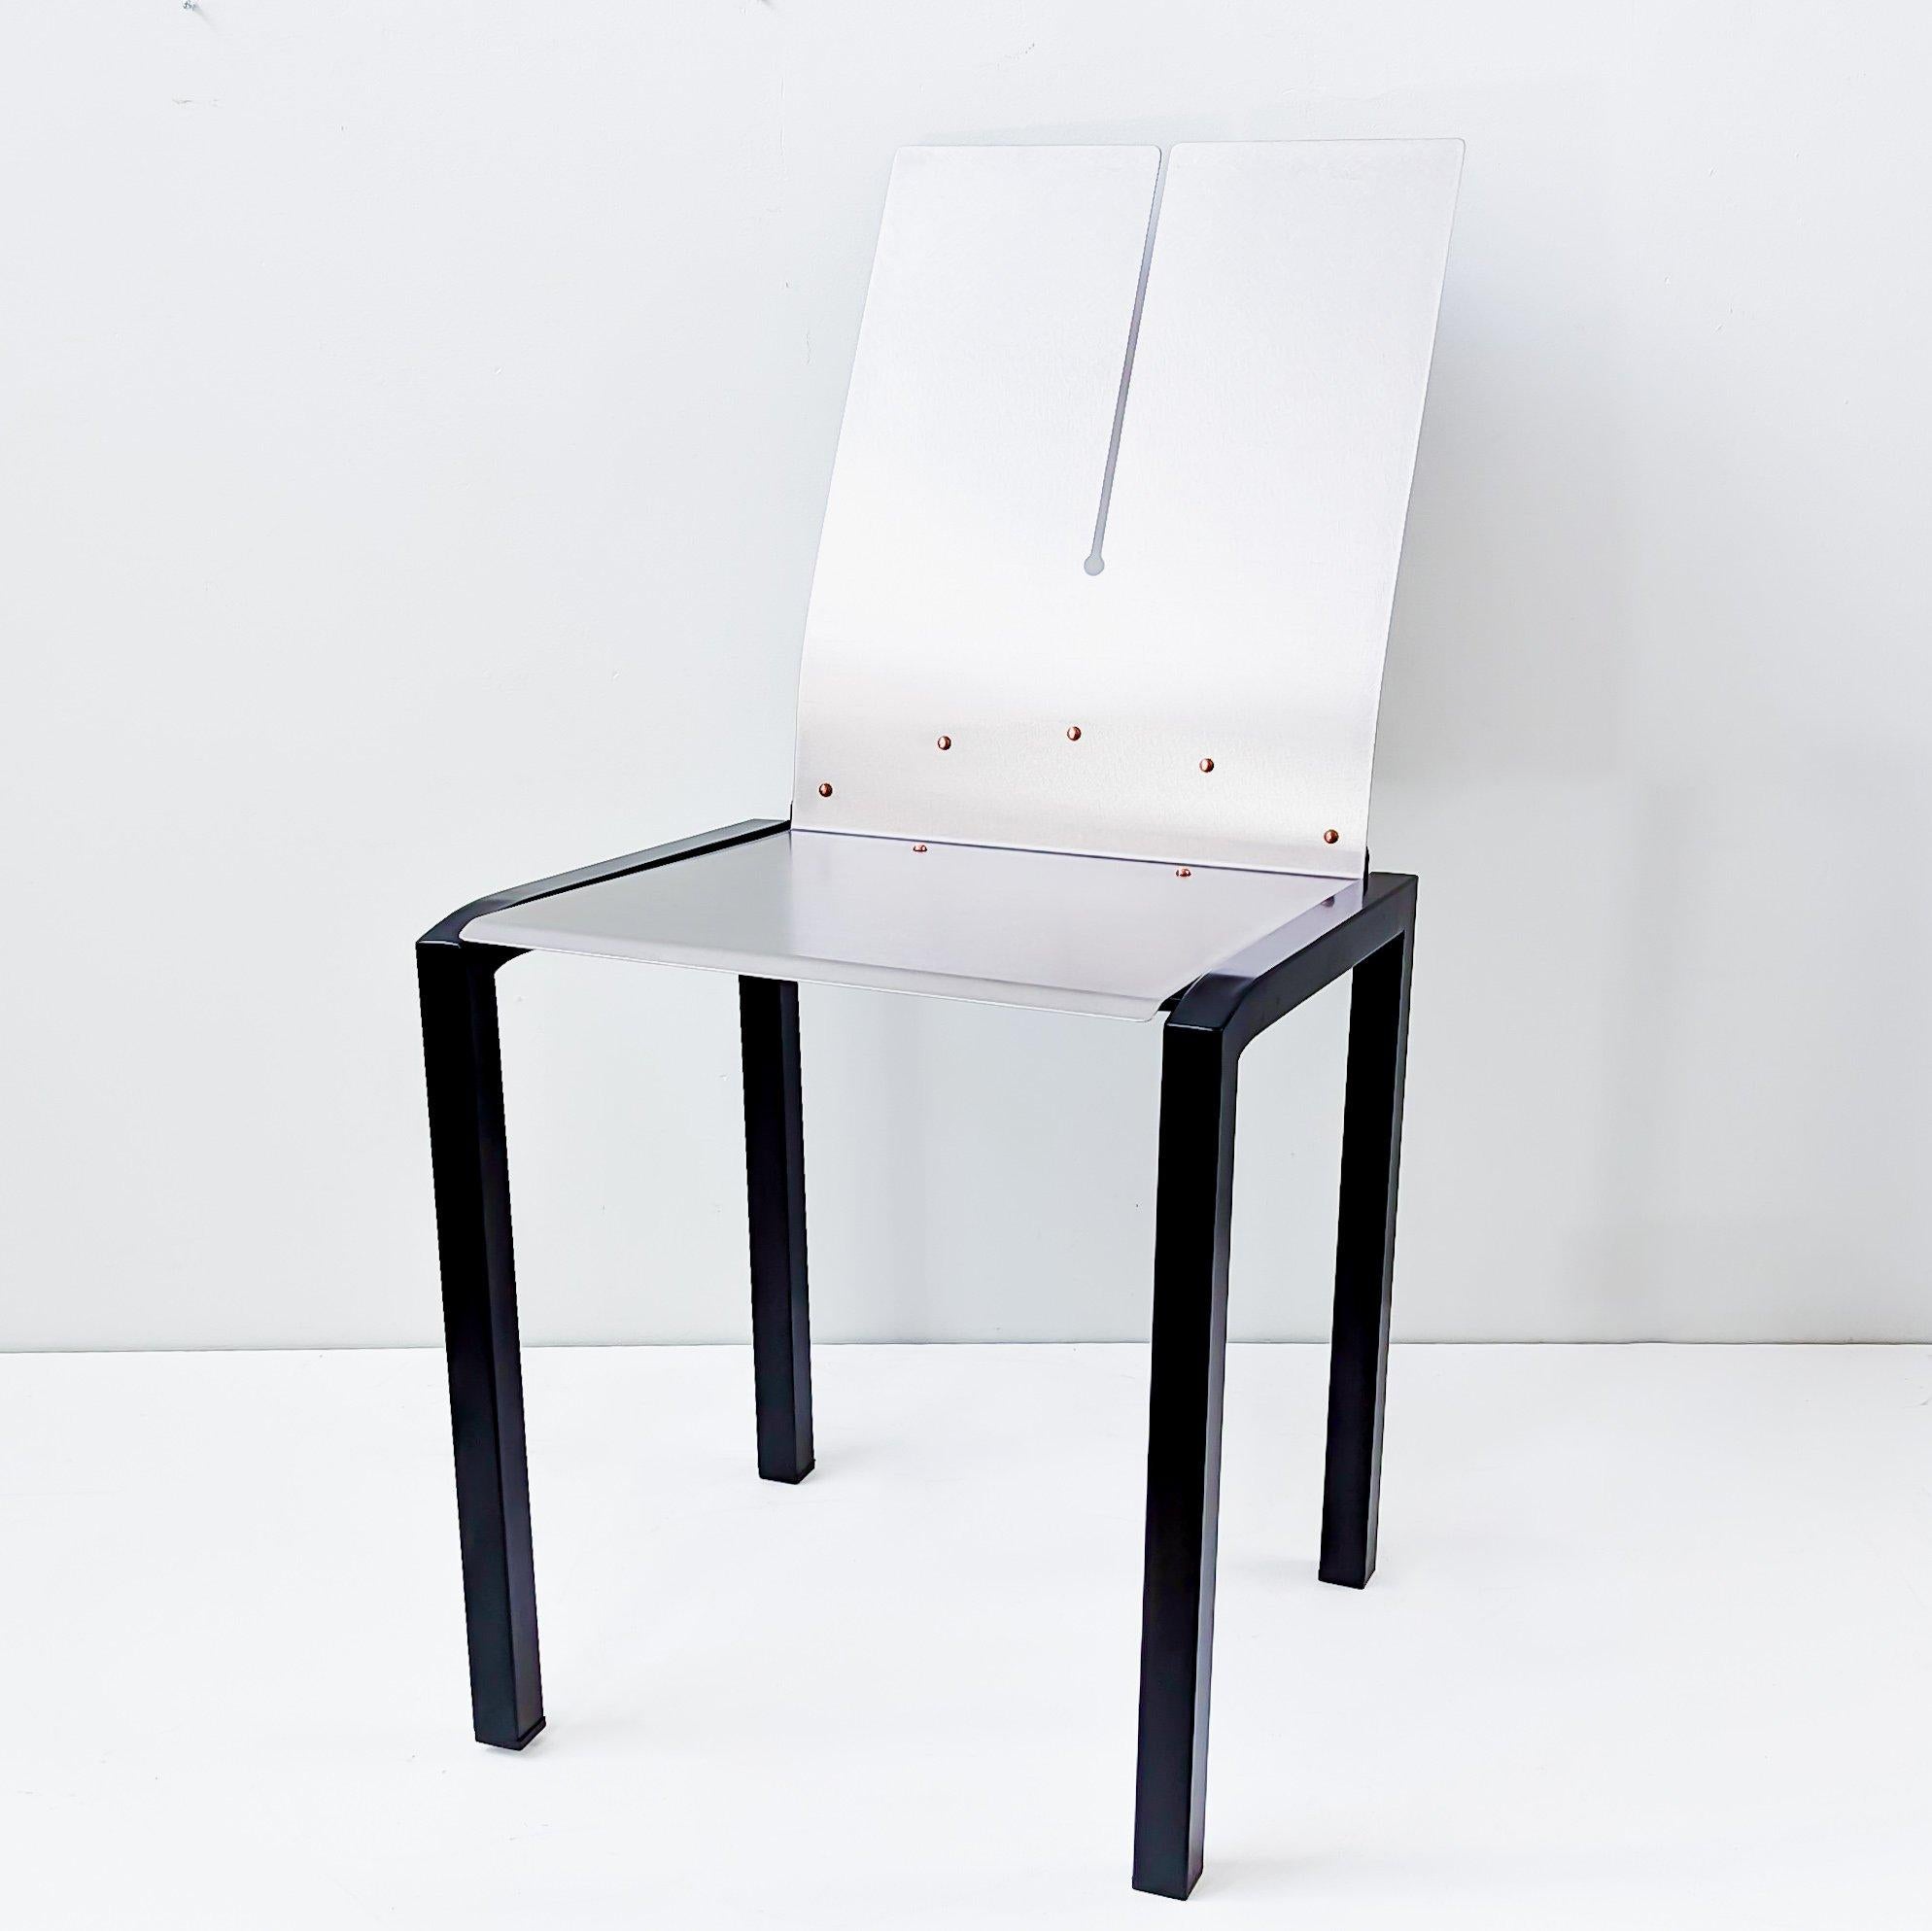 Set of 4 Metal 'Blade' Chairs By Maurizio Peregalli , Italy / C.1980 For Sale 2